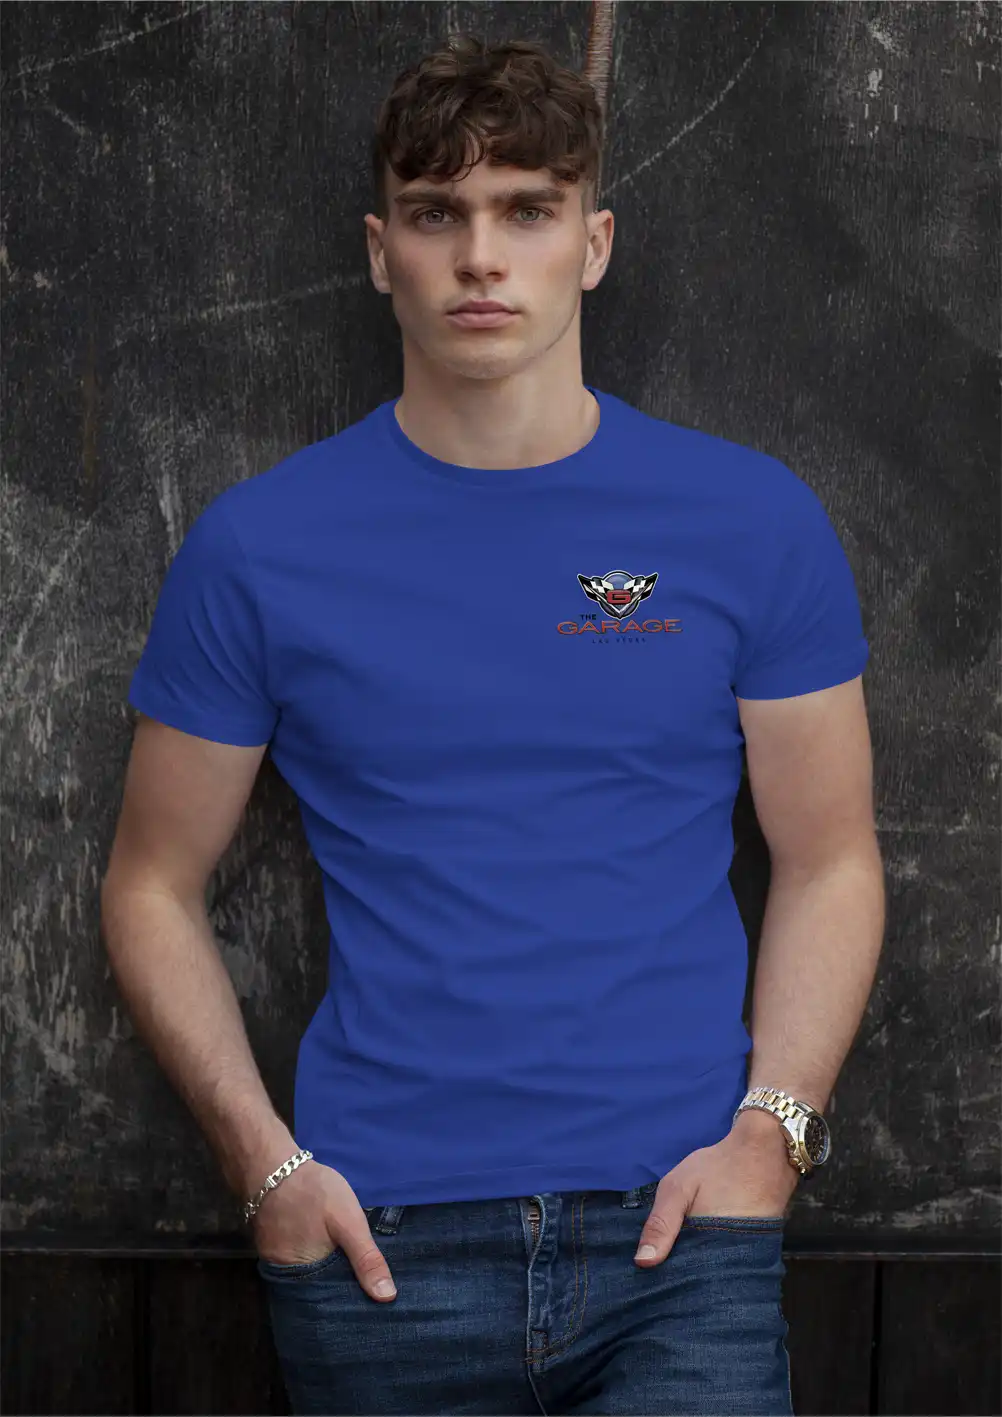 Handsome guy modeling a blue T-shirt with The Garage Las Vegas logo